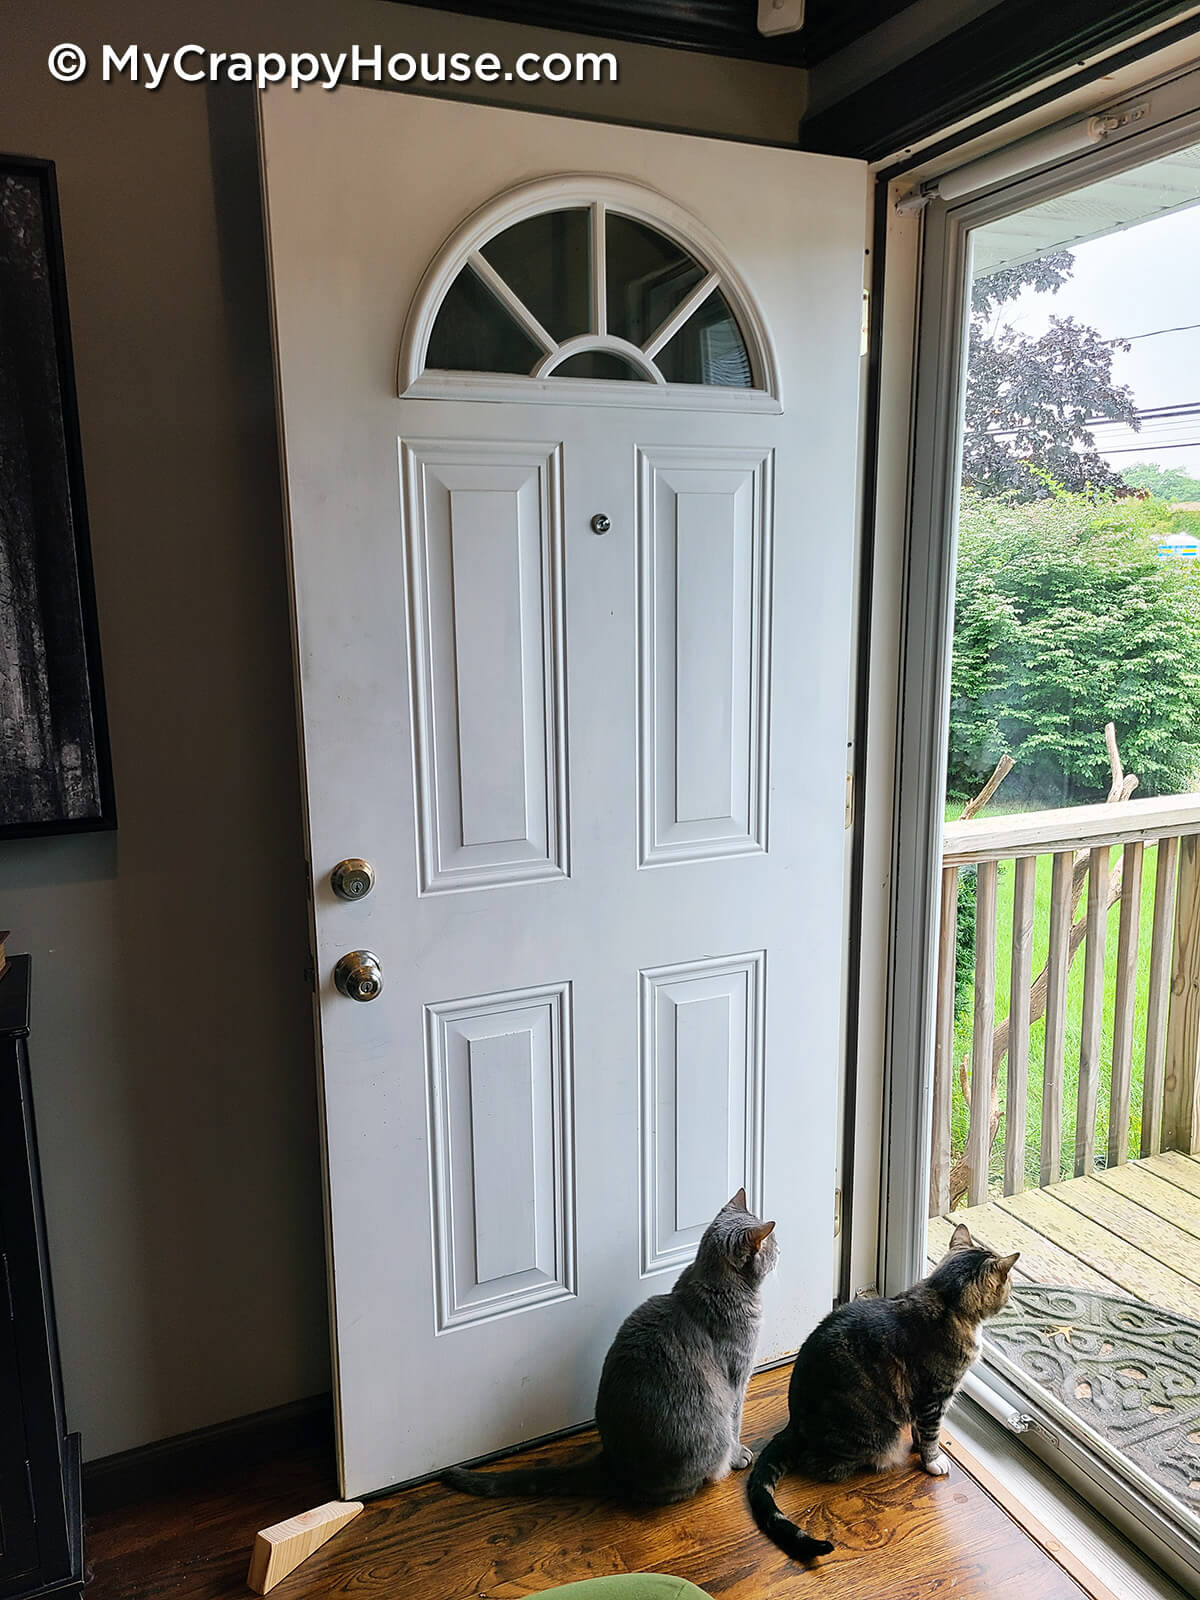 Two cats looking out the glass front door